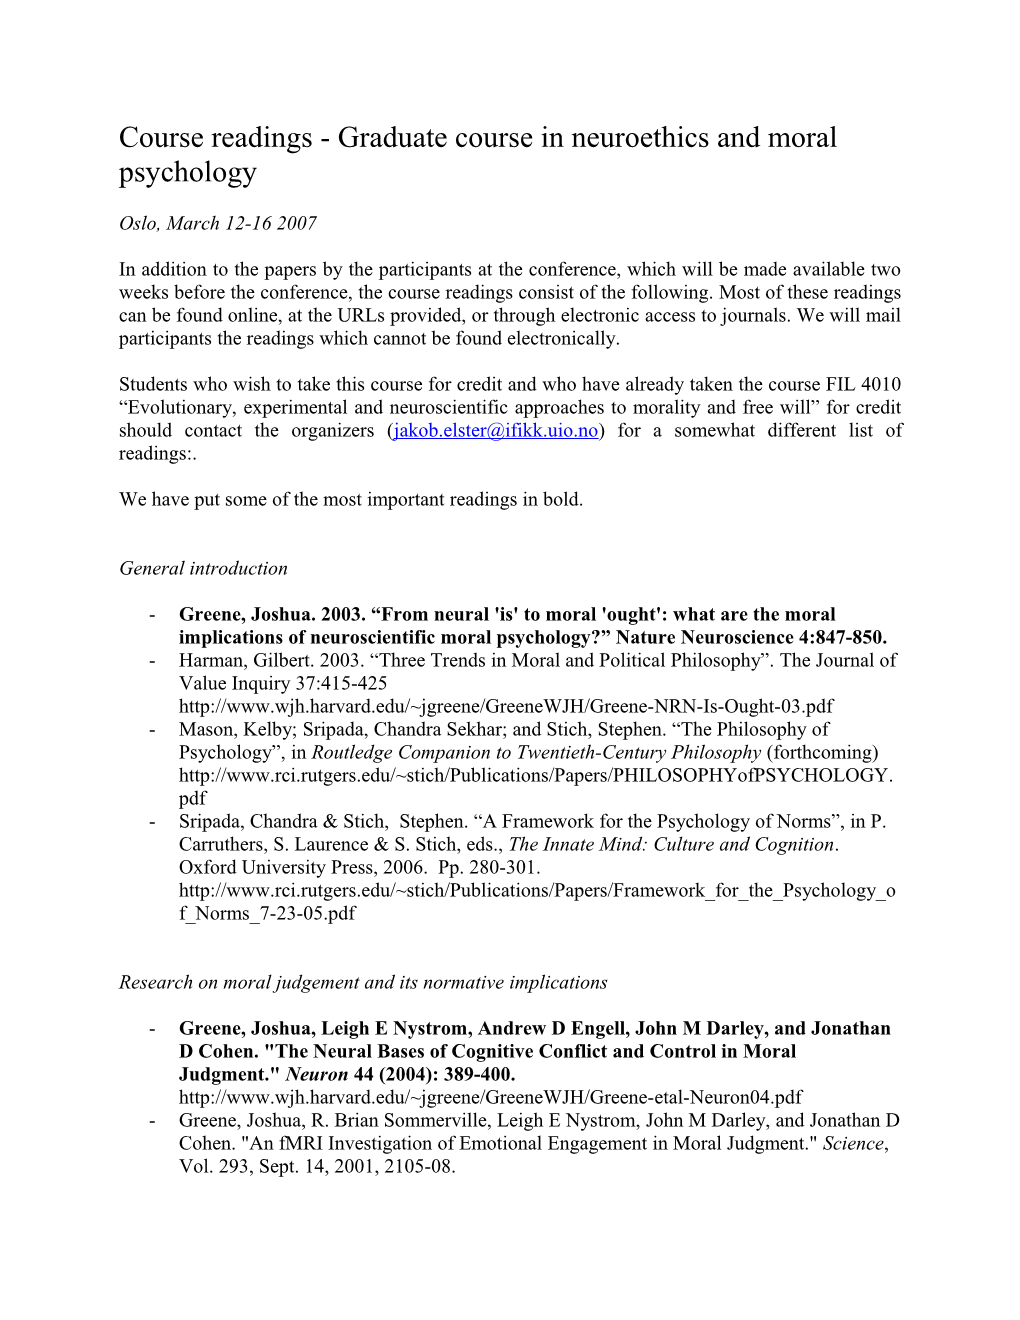 Course Readings - Graduate Course in Neuroethics and Moral Psychology